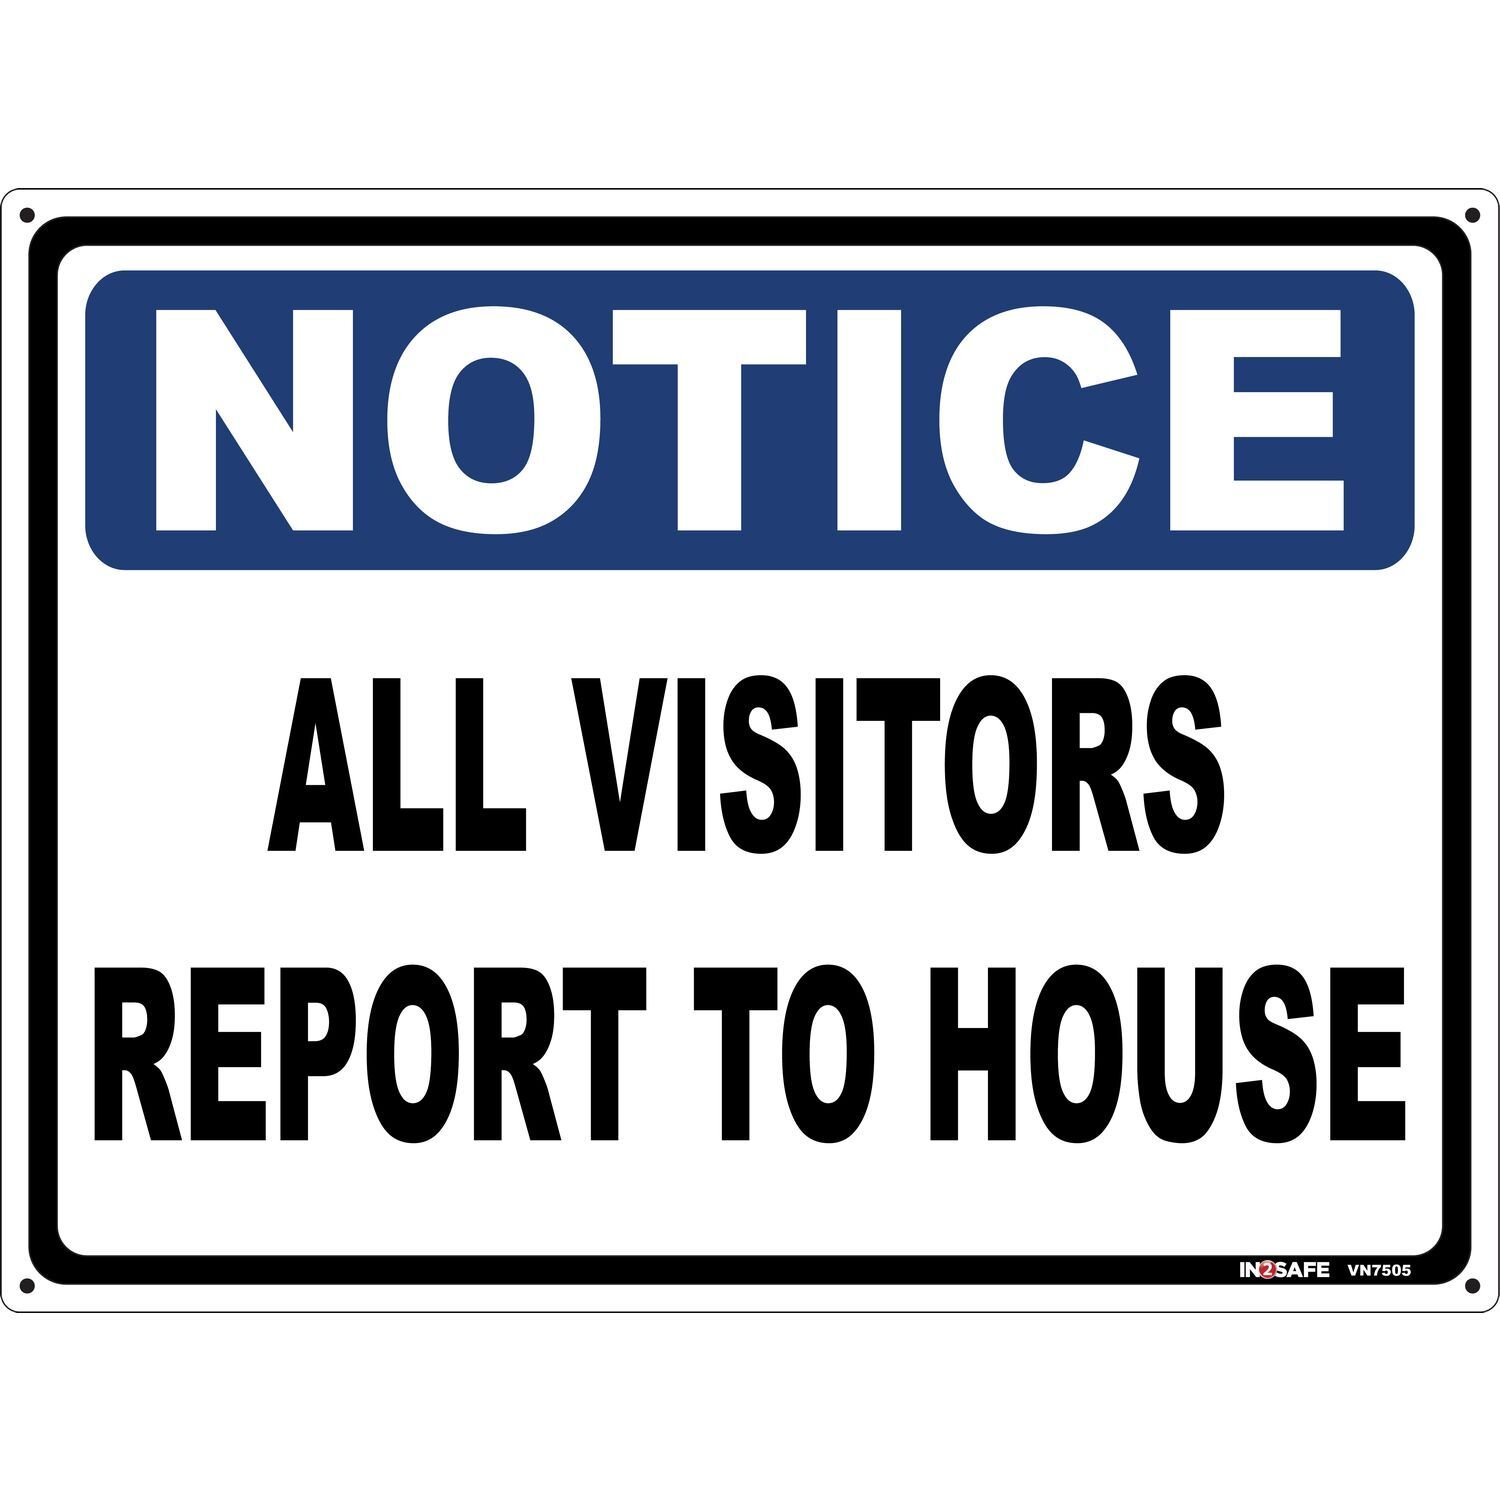 NOTICE All Visitors Report To House